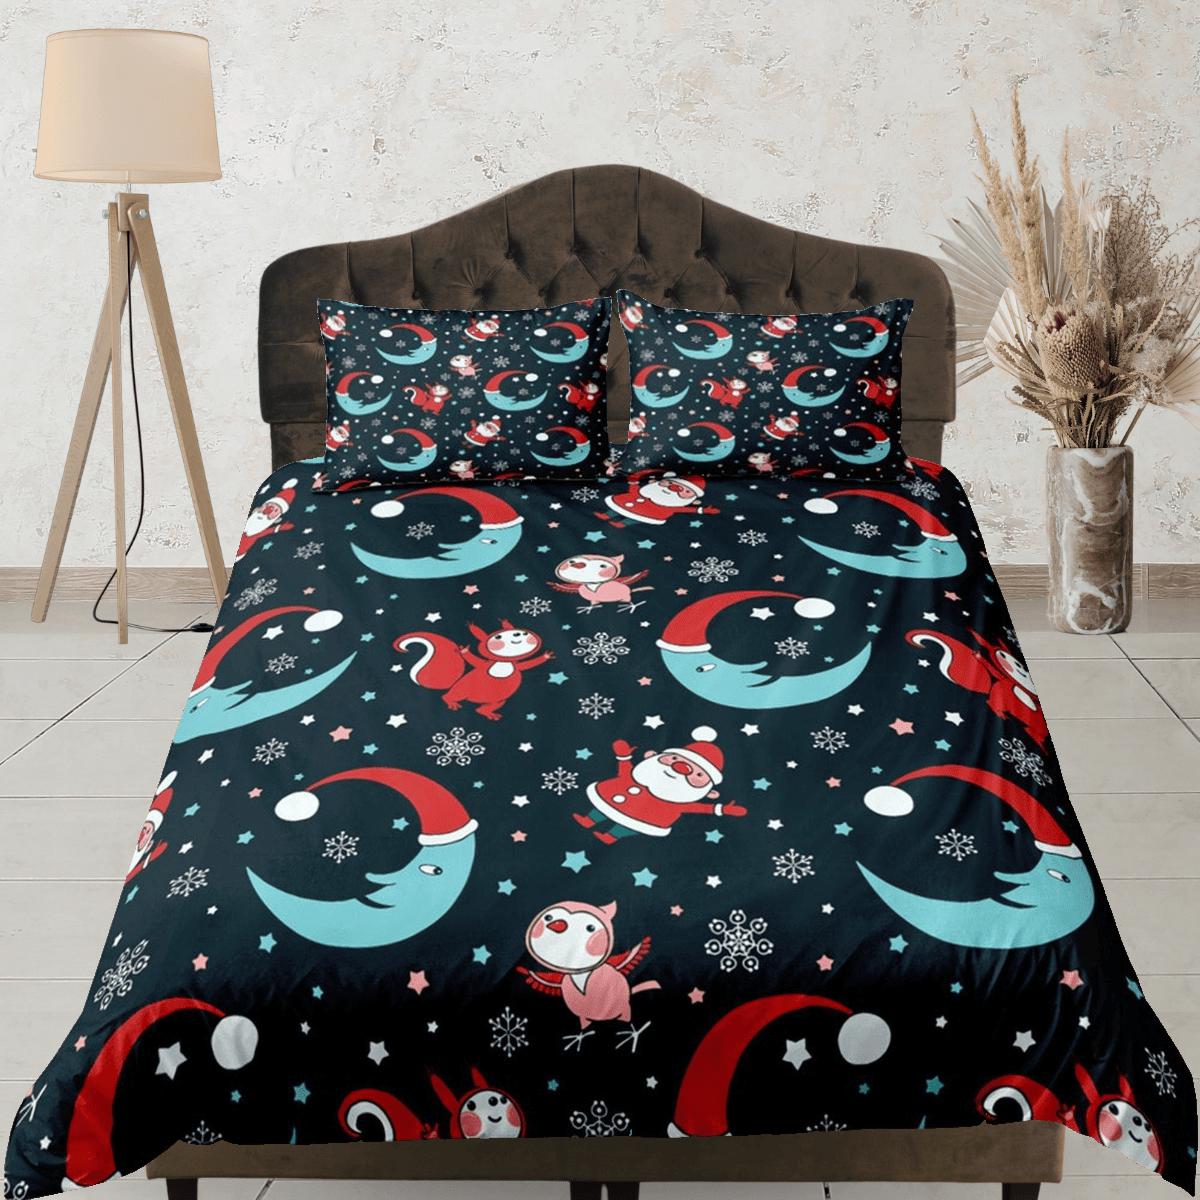 daintyduvet Blue moon and santa claus duvet cover set, christmas full size bedding & pillowcase, college bedding, crib toddler bedding, holiday gift